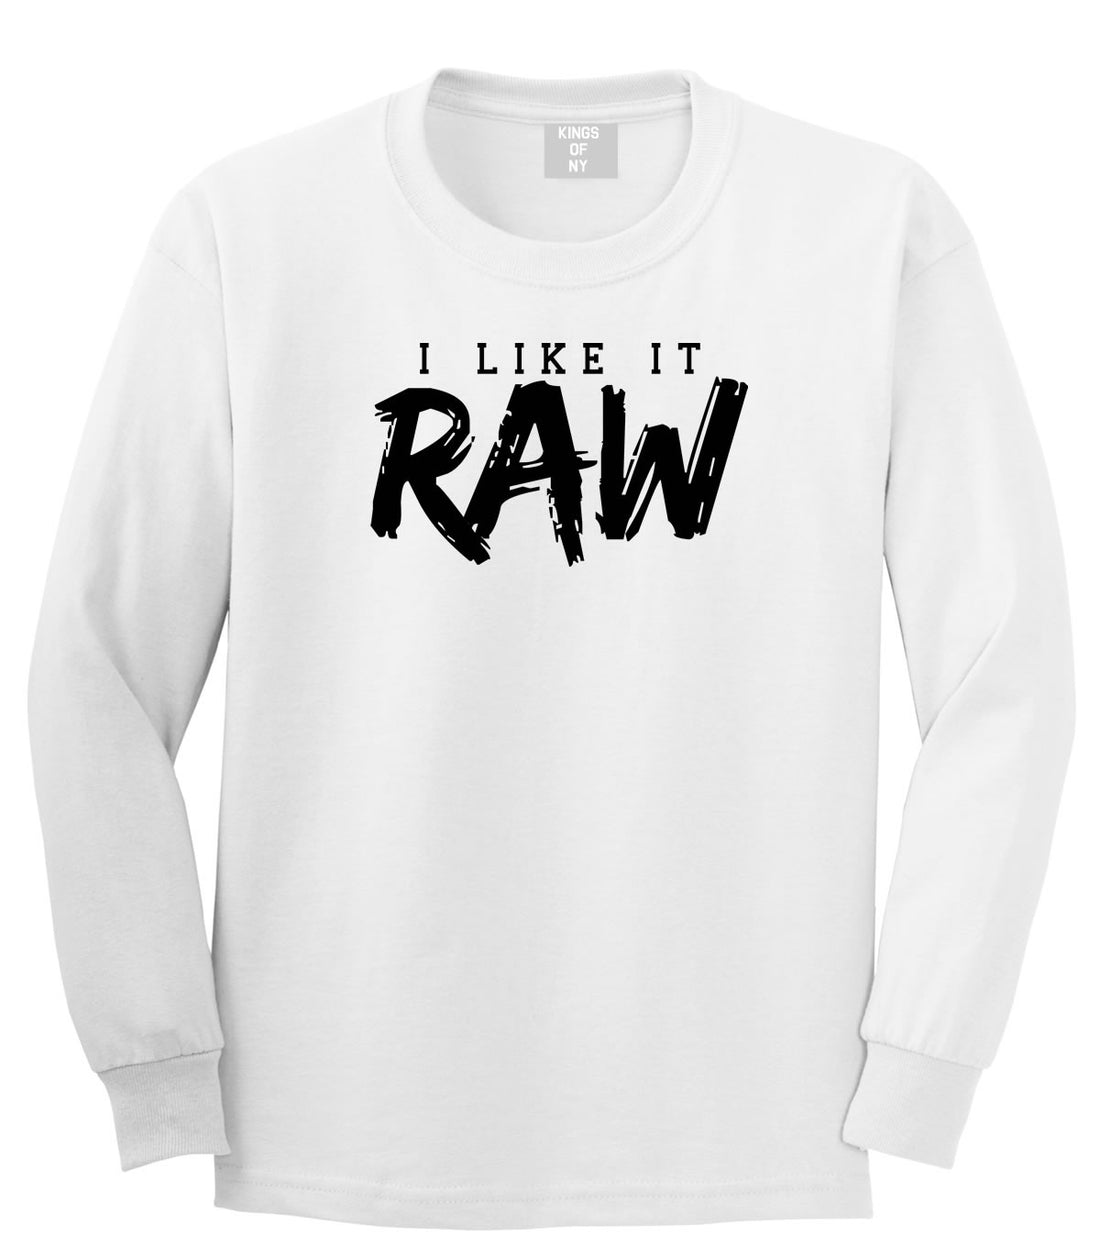 I Like It Raw Long Sleeve T-Shirt in White By Kings Of NY